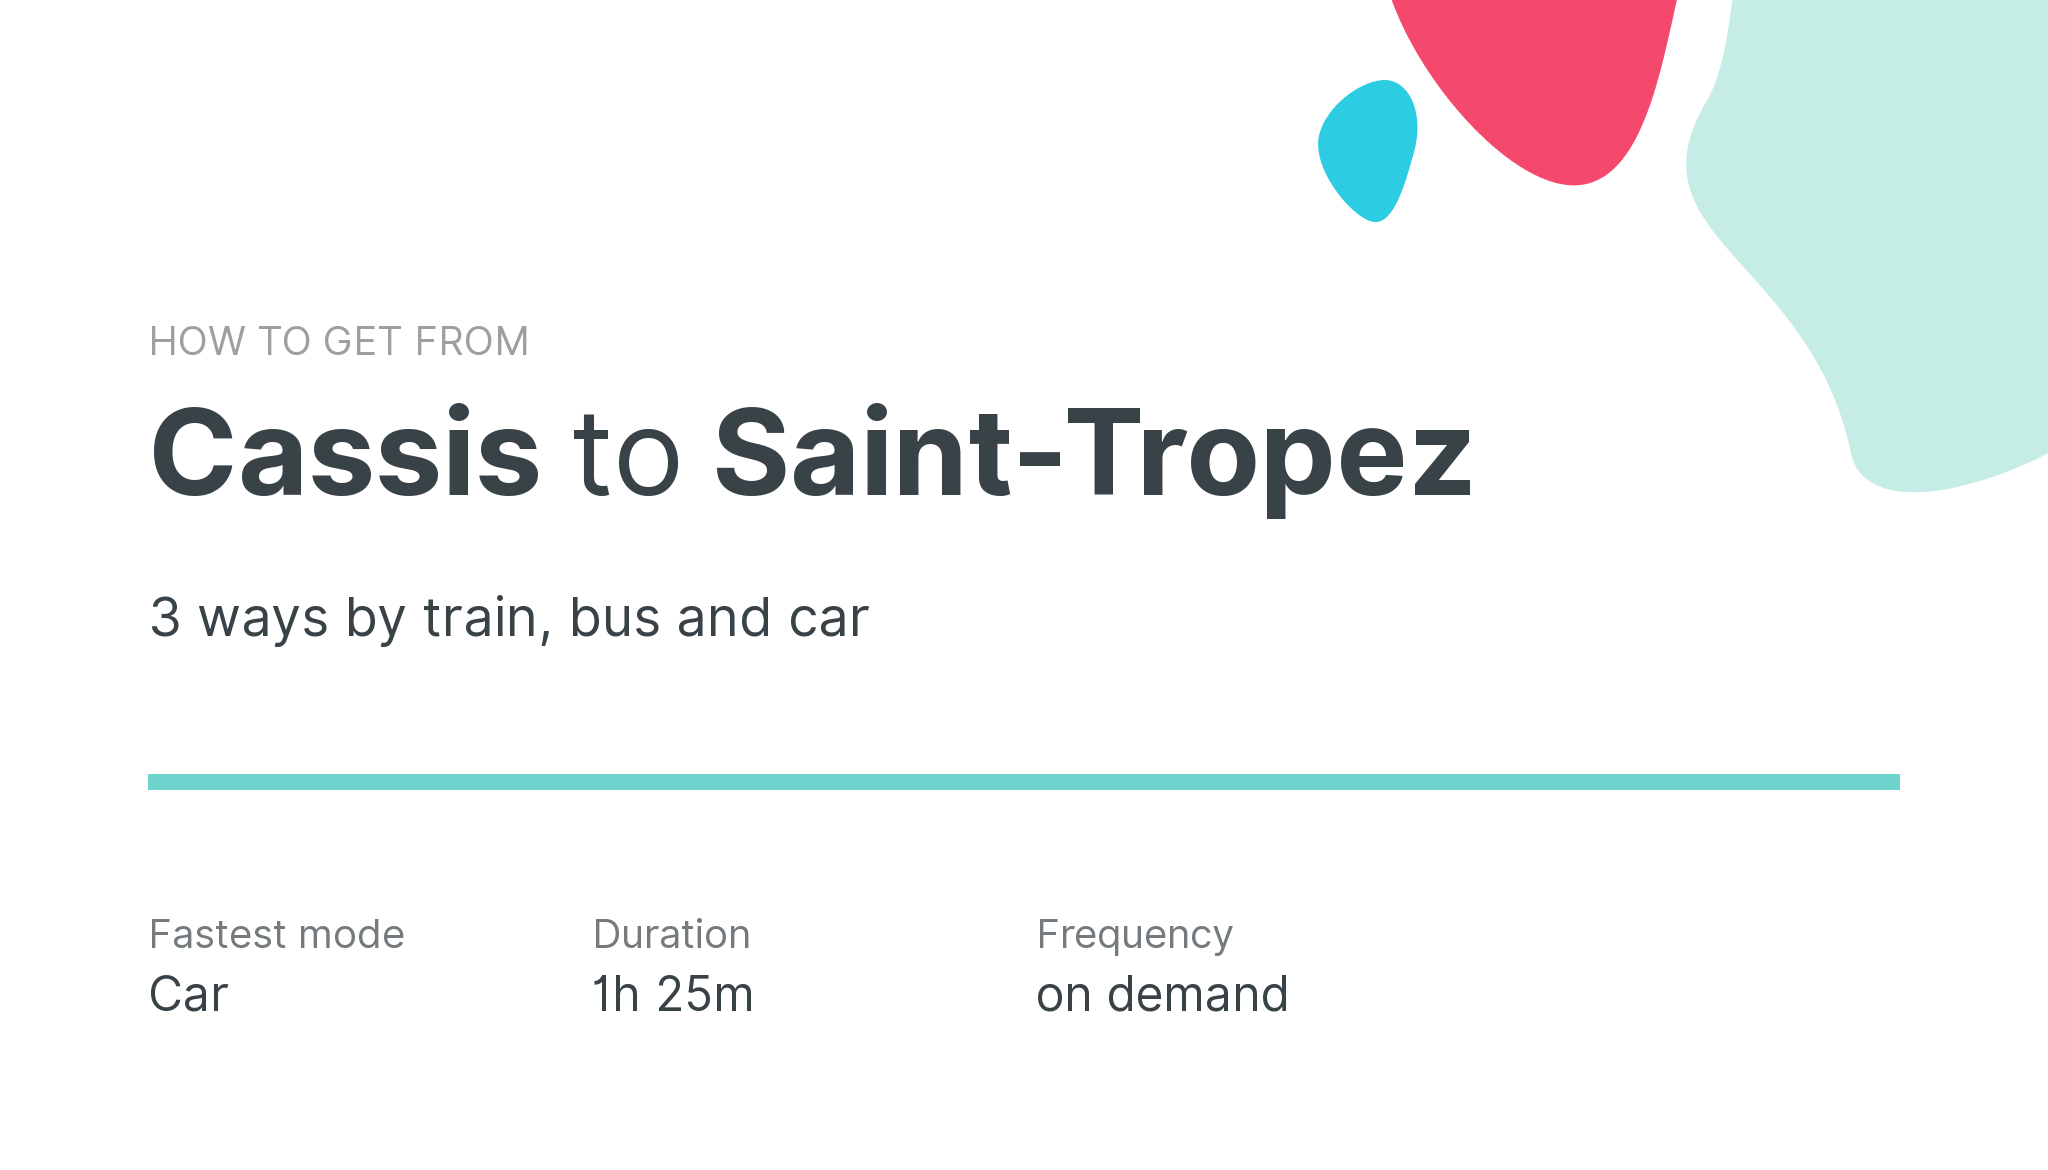 How do I get from Cassis to Saint-Tropez